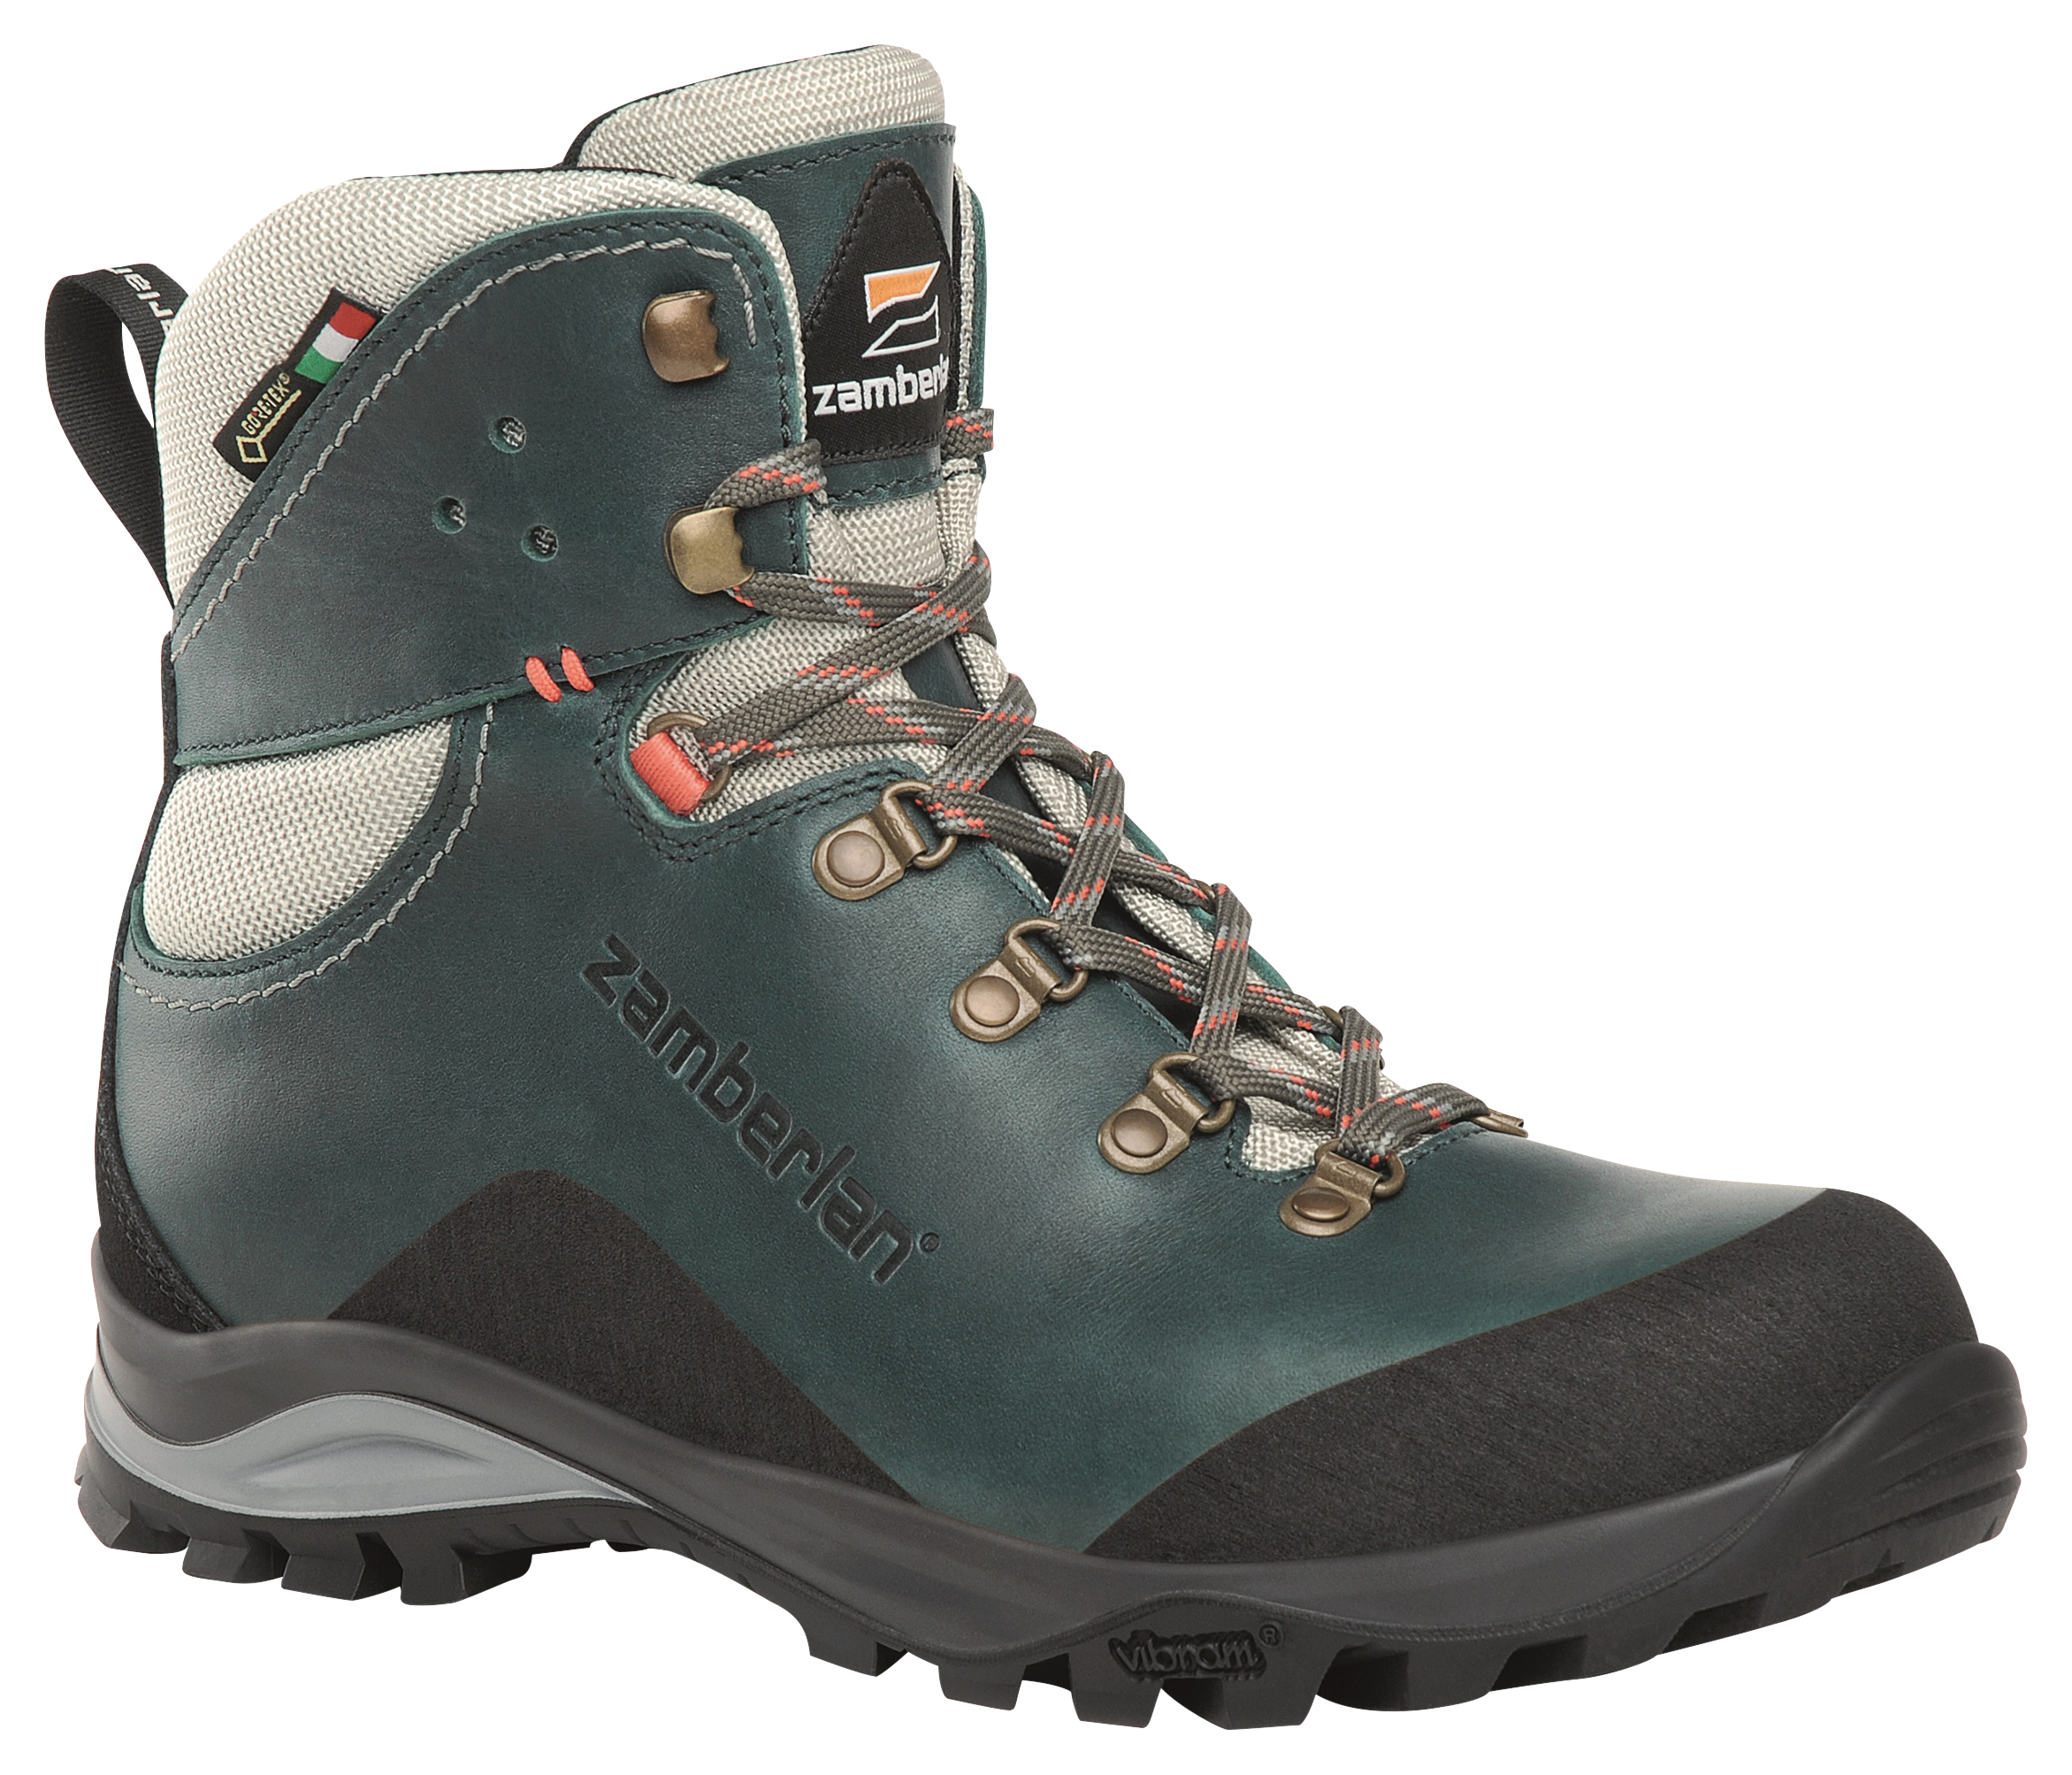 Zamberlan 330 Marie GTX RR Hiking Boots for Ladies